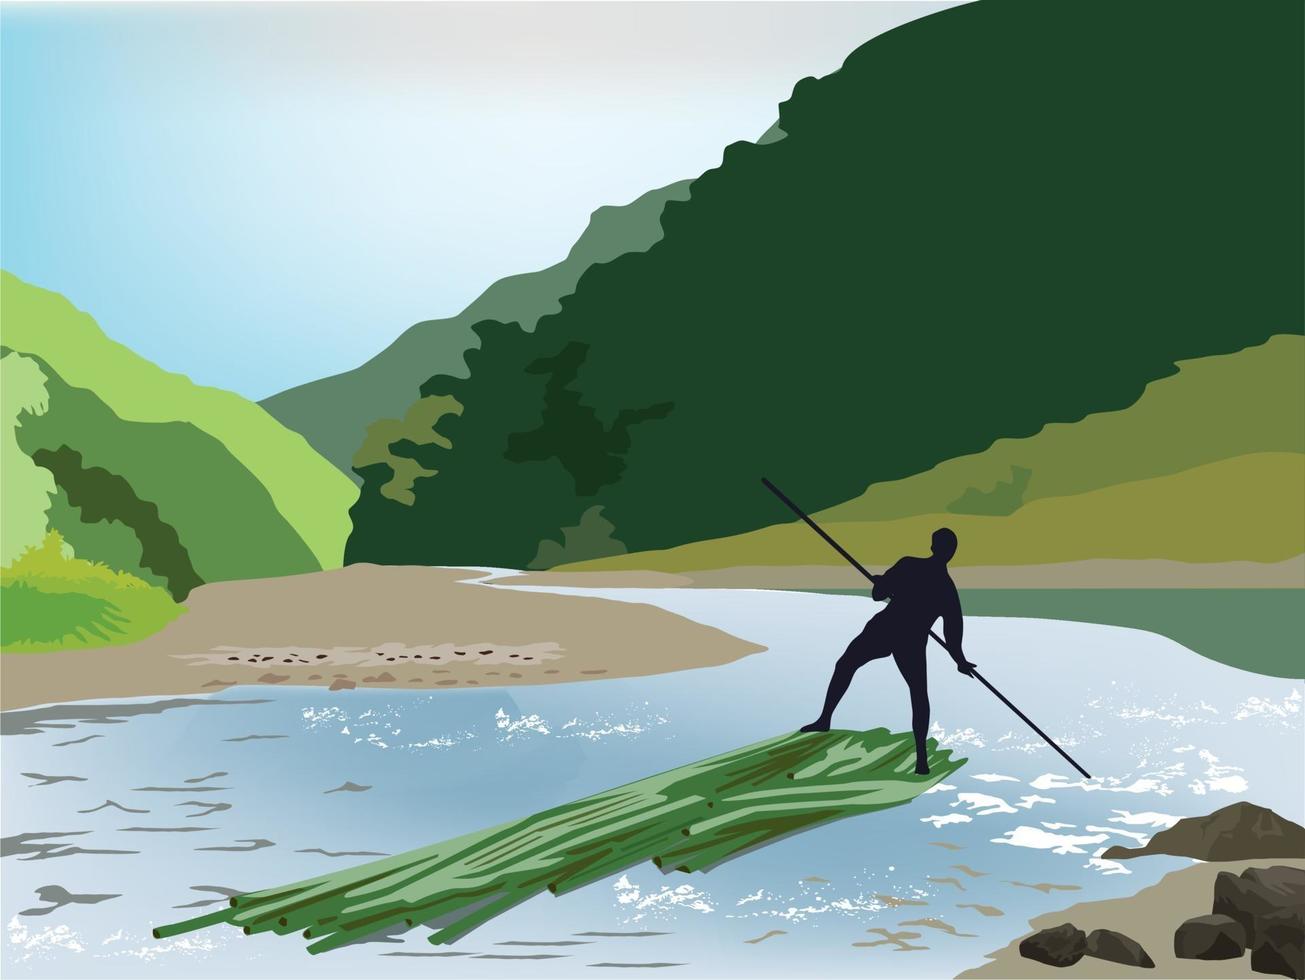 Bamboo Rafting on illustration graphic vector